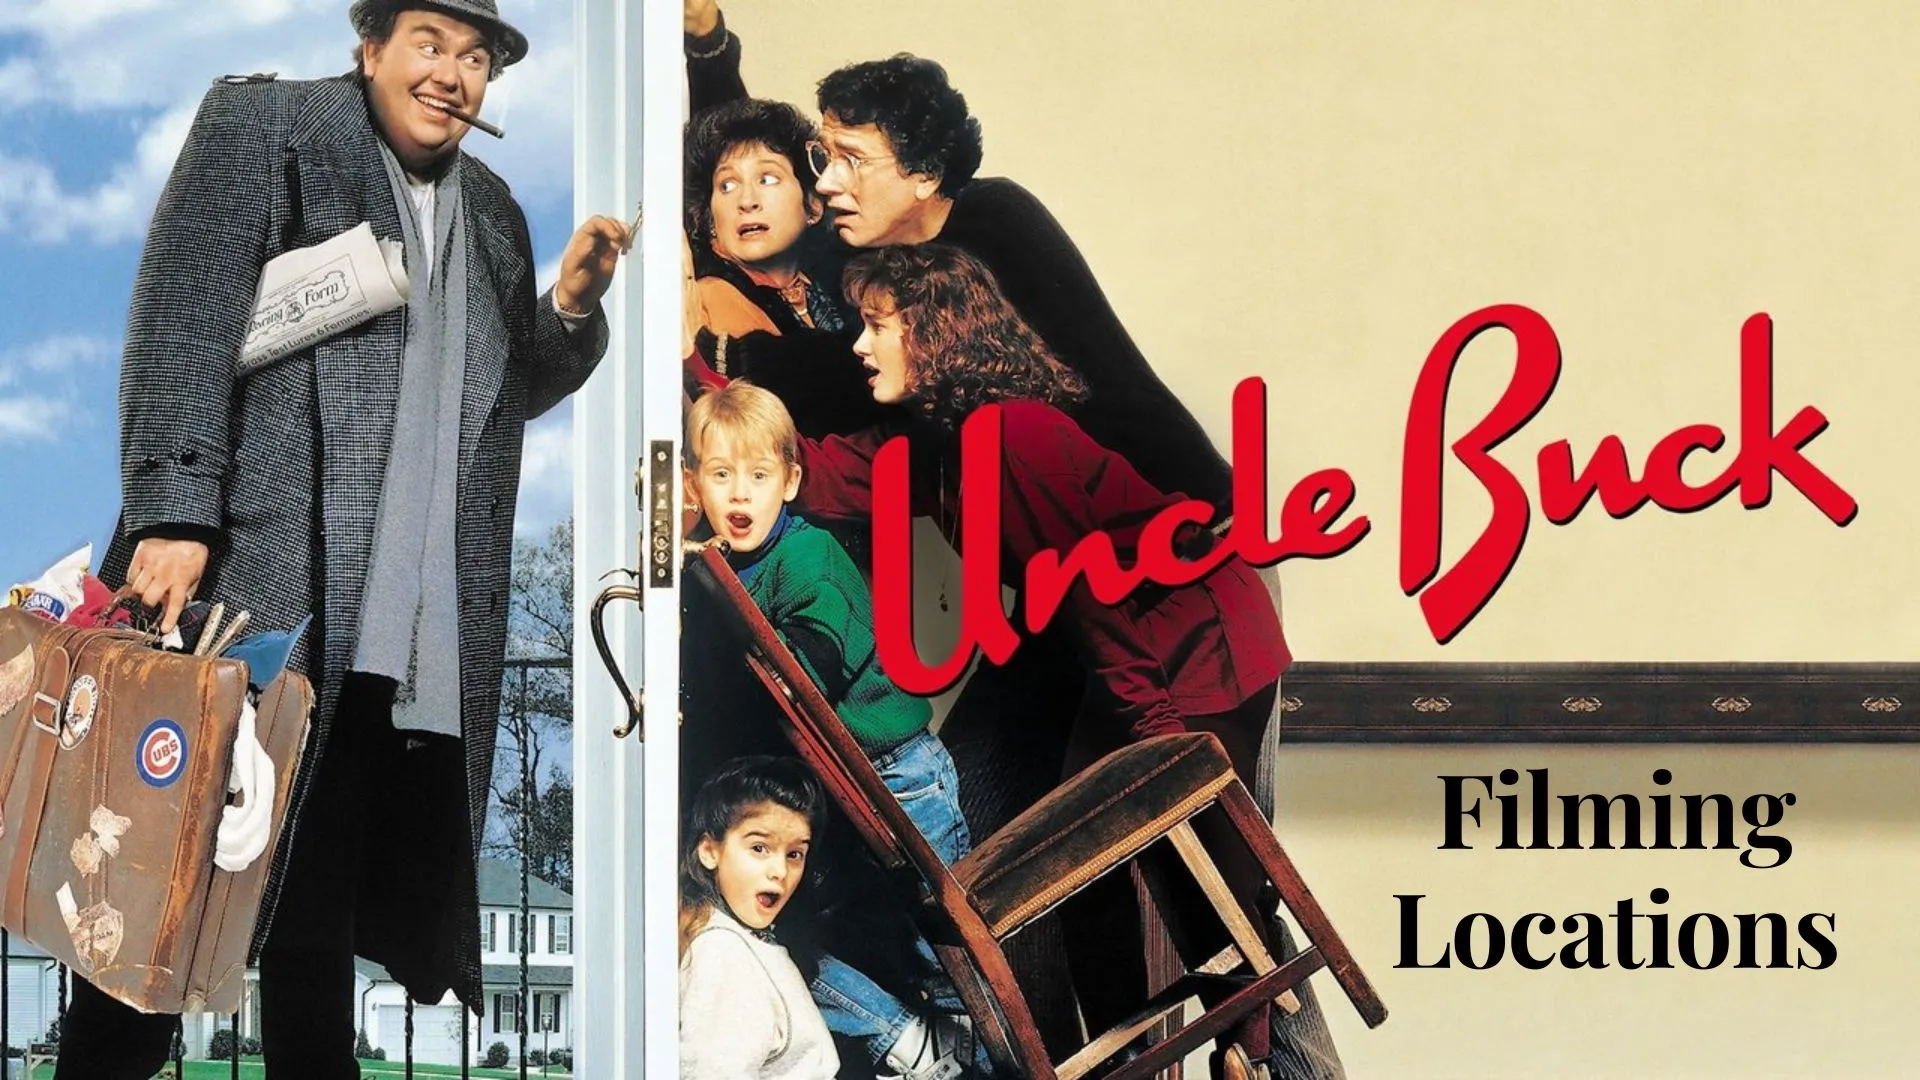 Uncle Buck Filming Locations